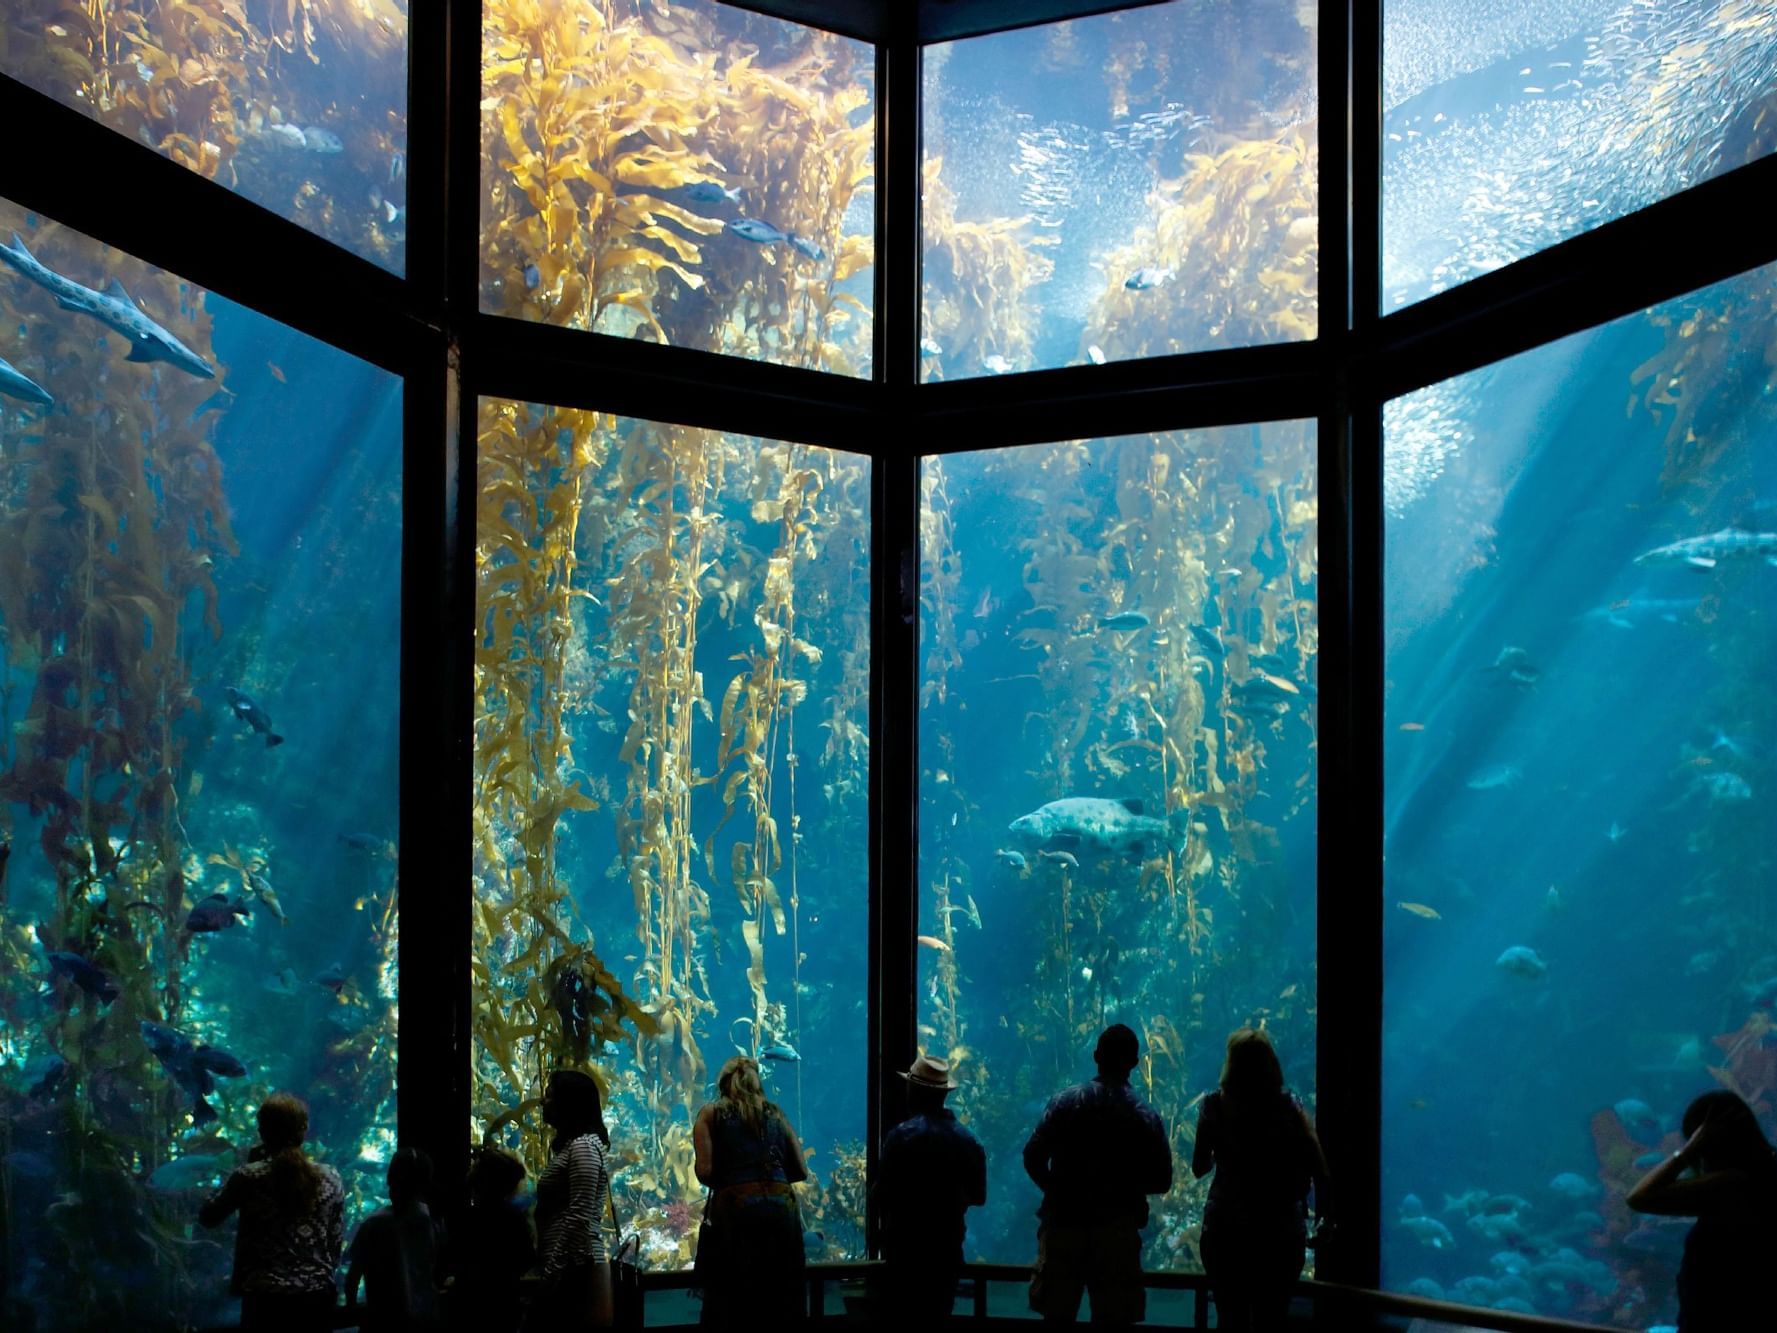 Monterey Bay Aquarium attendees standing in front of the kelp bed exhibit featuring kelp and other aquatic animals